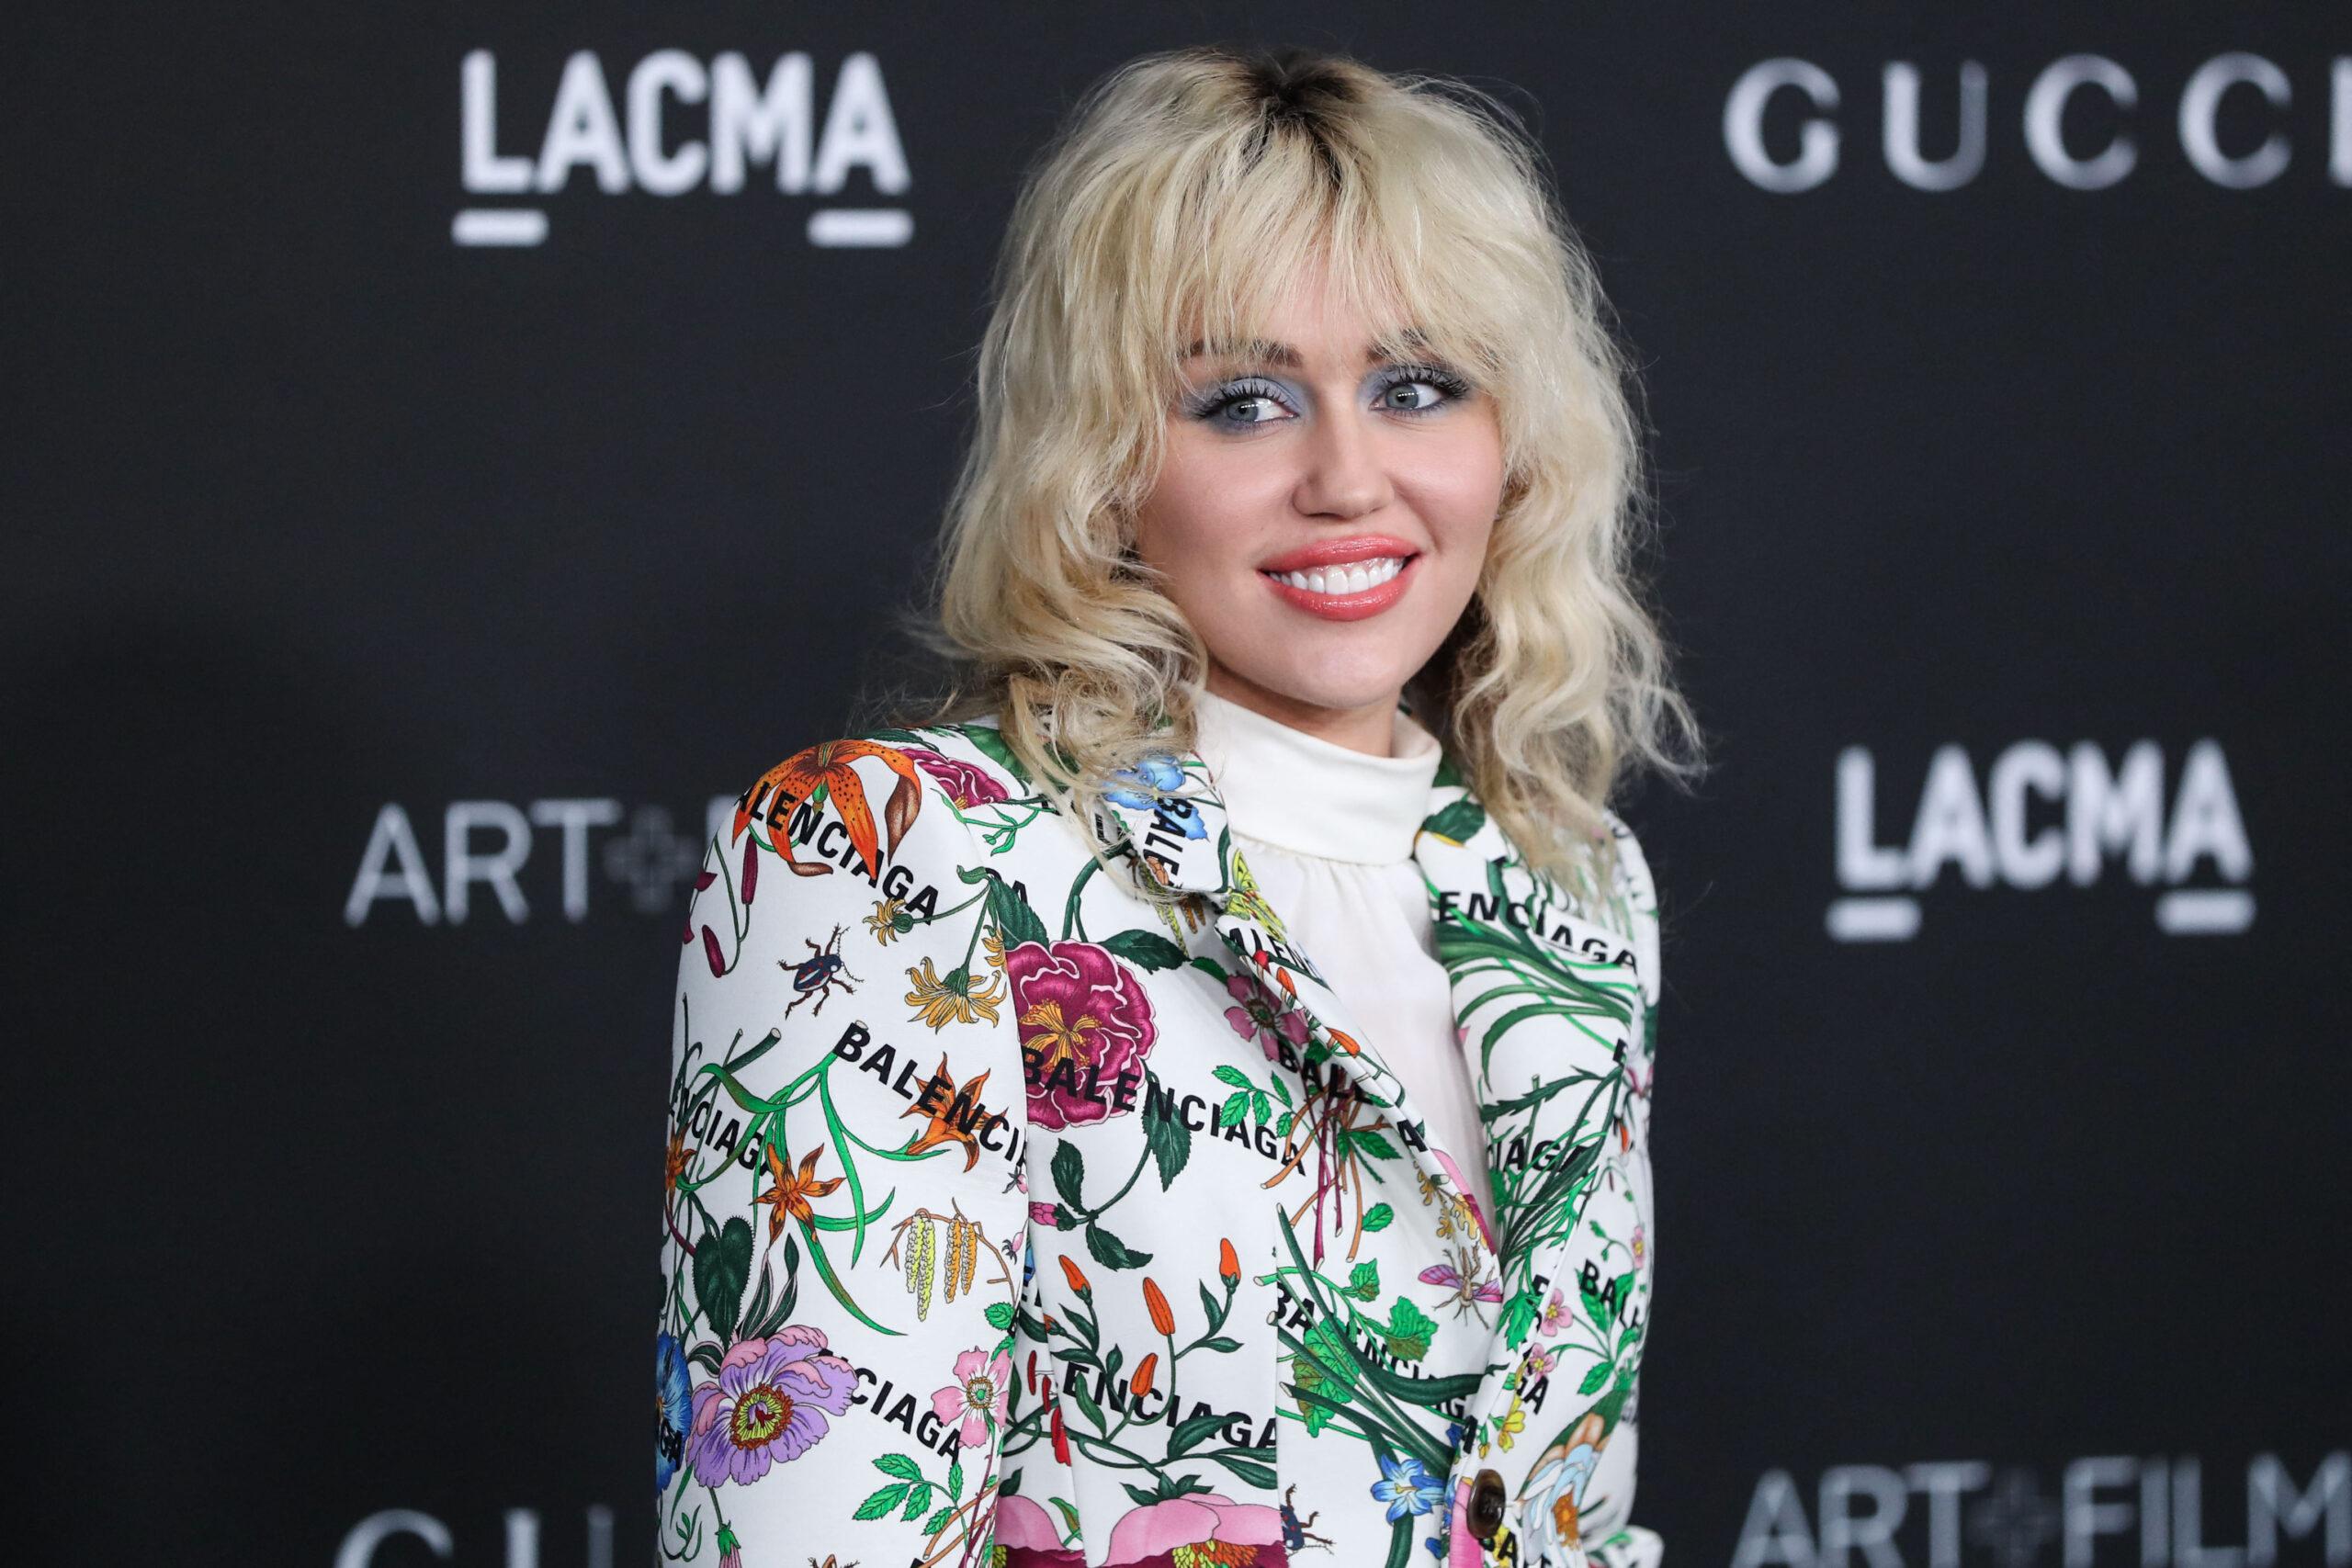 Miley Cyrus's Accusations Against Disney For Intense Work Schedule Resurfaces